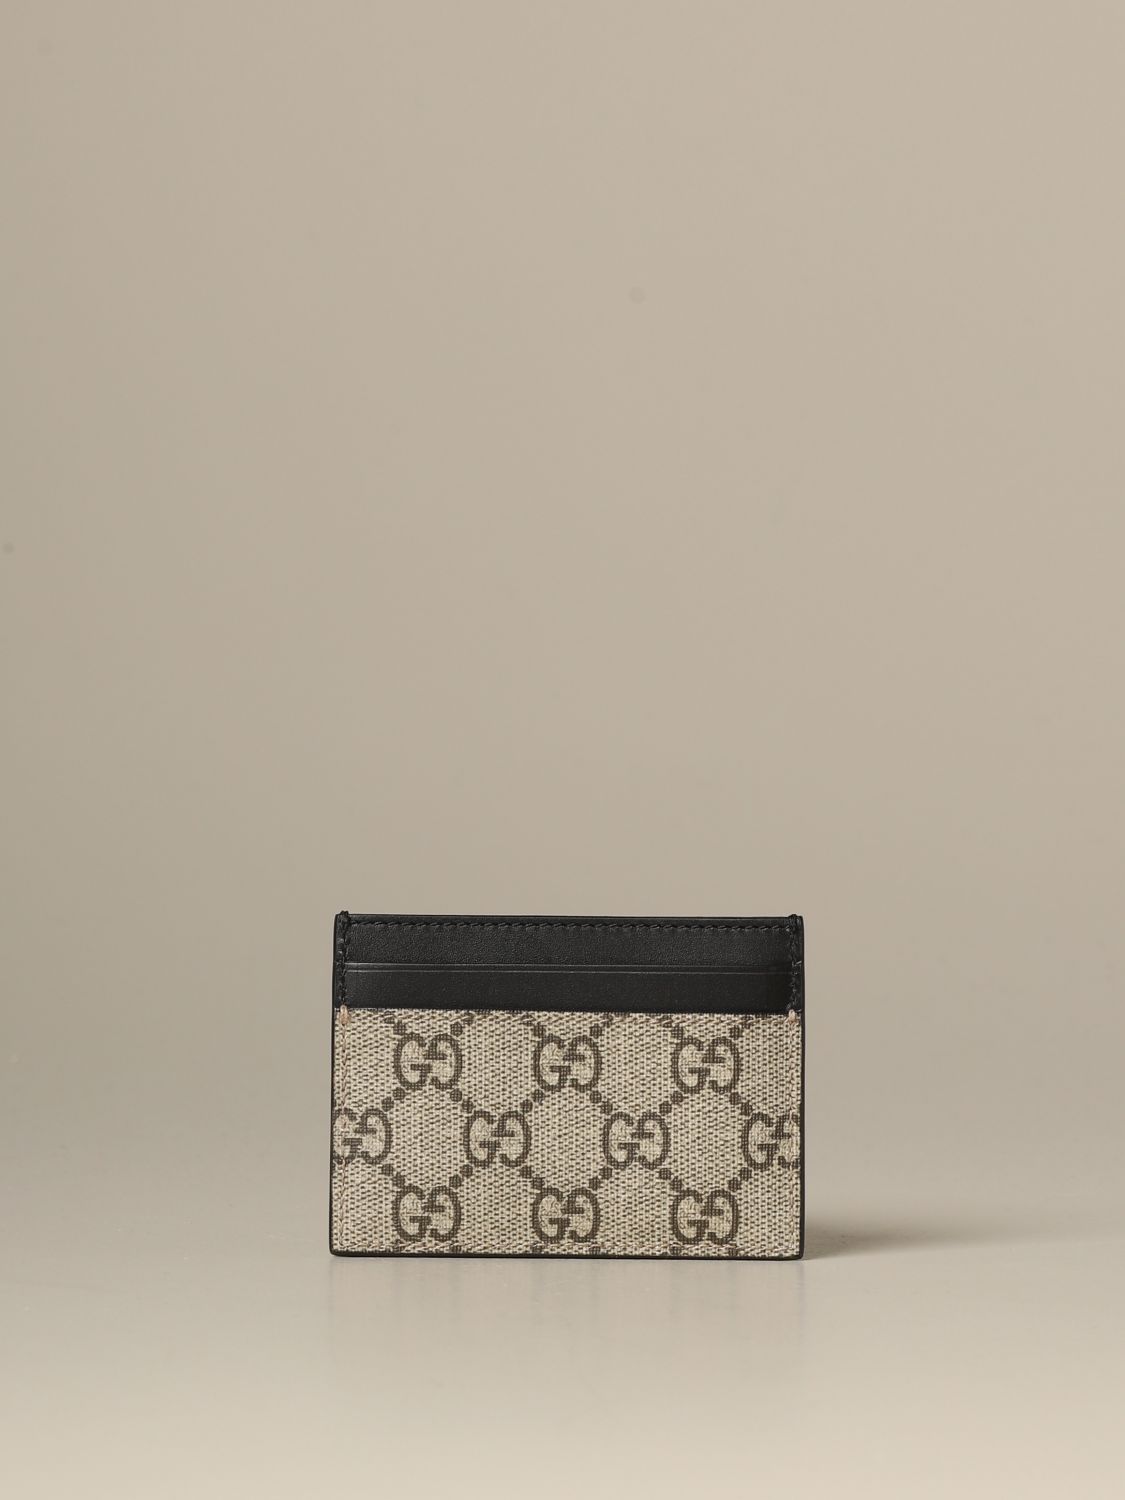 GUCCI: Bestery credit card holder with bee print - Beige | Gucci wallet  451277 K5T1N online on 